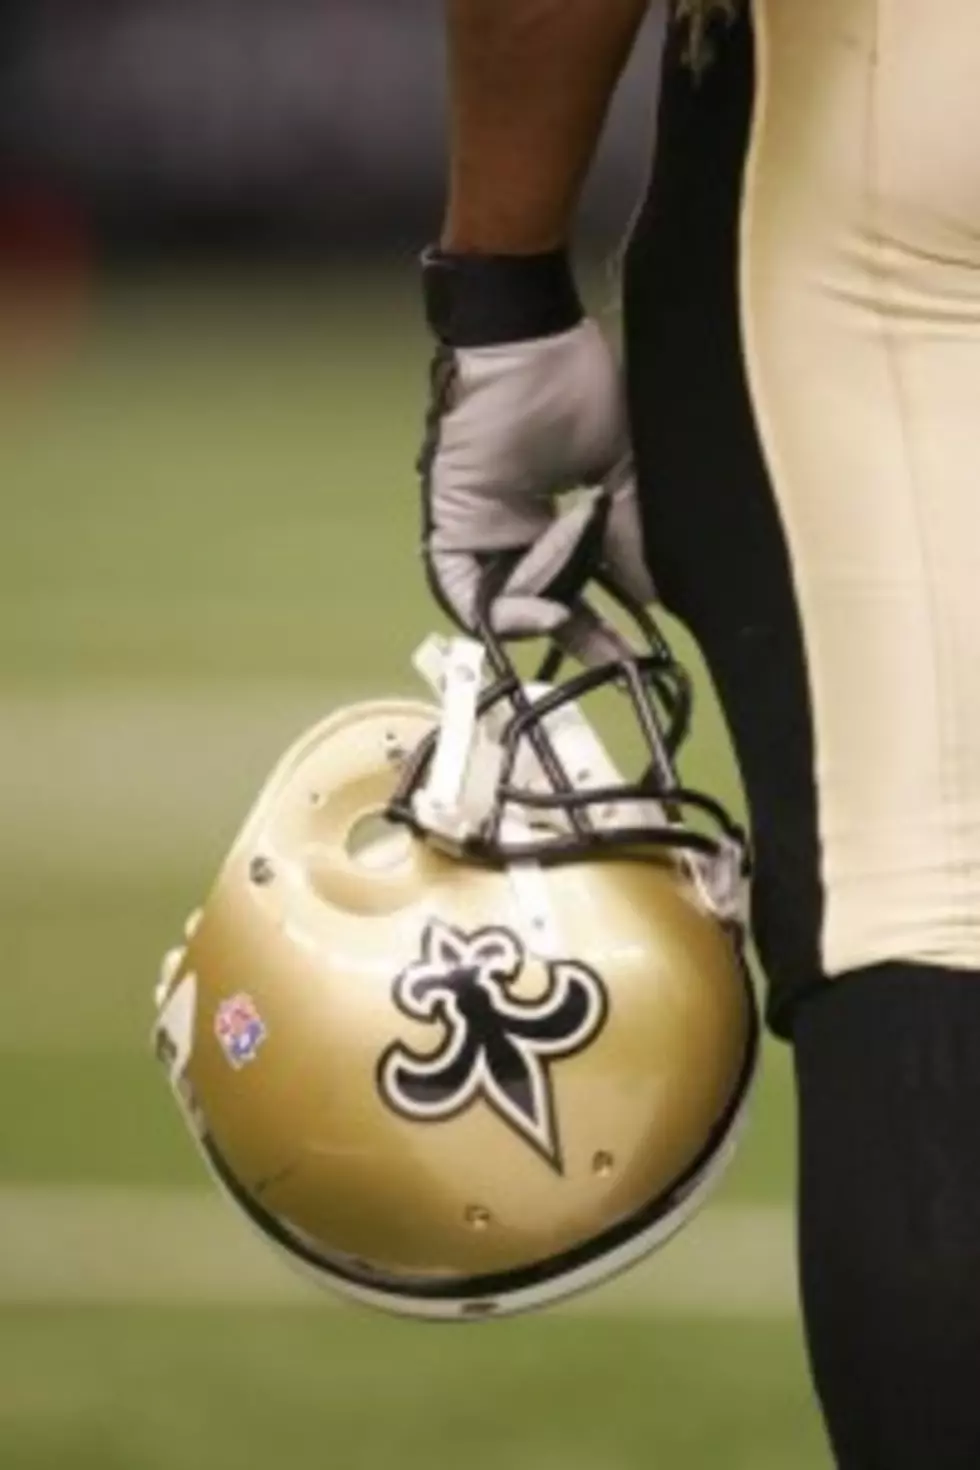 Saints Tough 2012 Schedule To Be Released Tomorrow